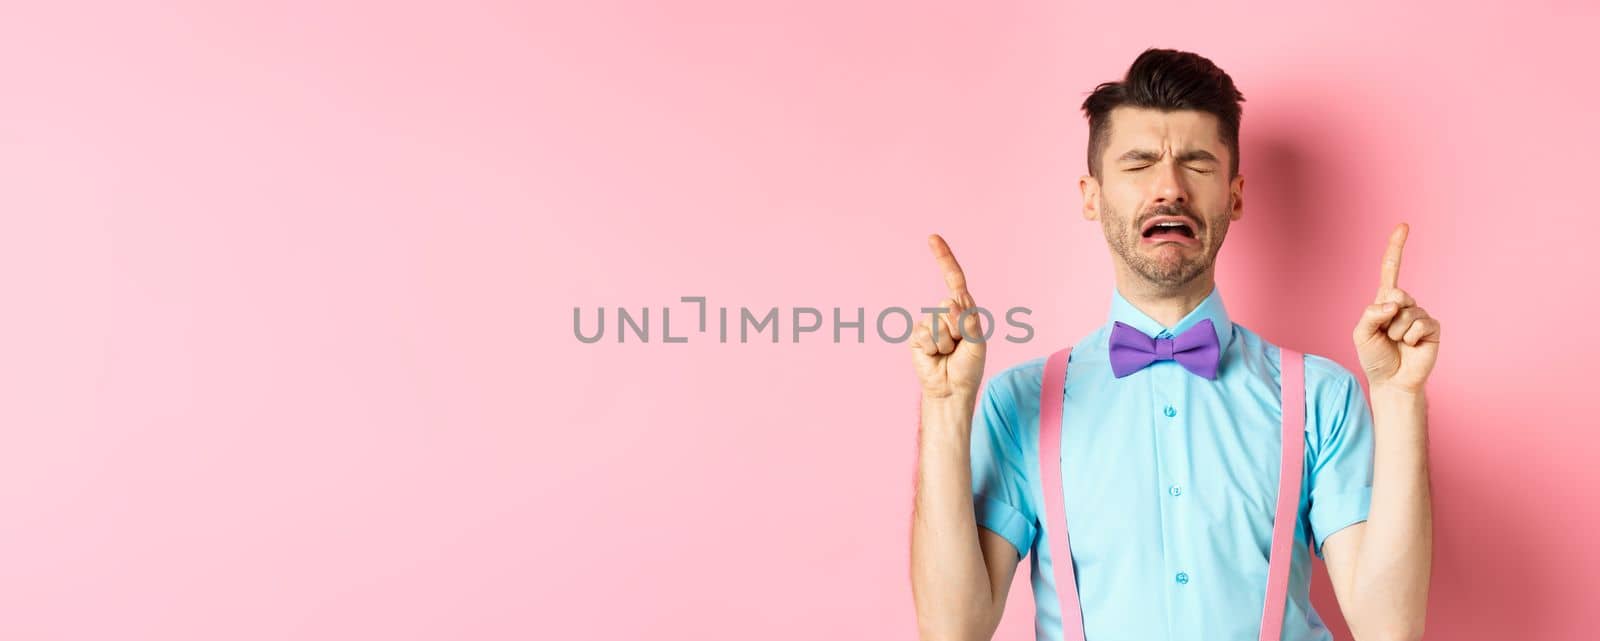 Sad and miserable guy sobbing and crying, pointing fingers up and something disappointed, standing upset on pink background.